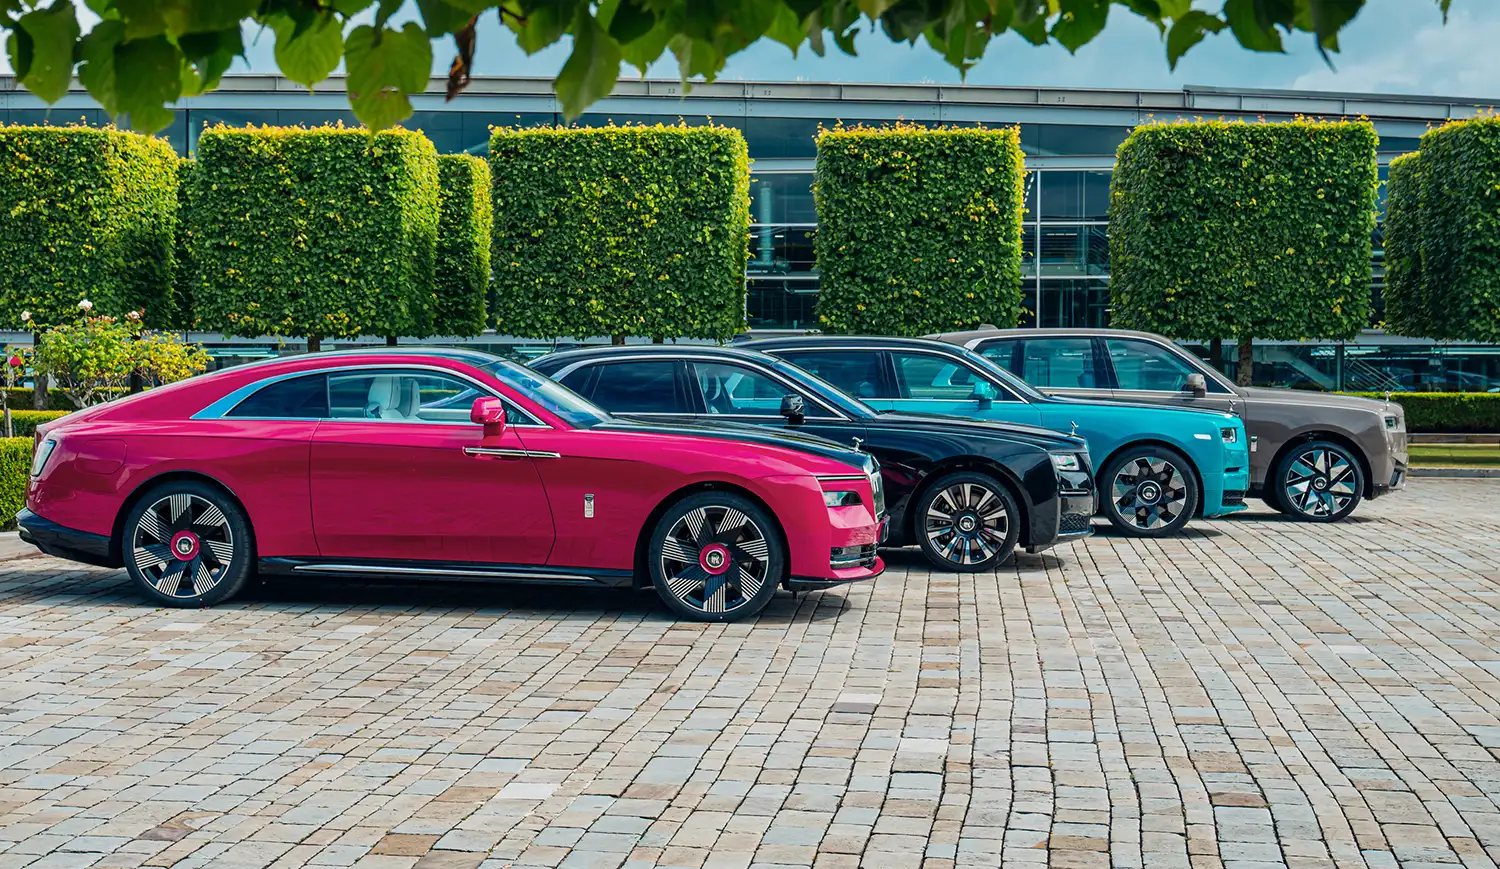 Rolls-Royce Celebrates Bespoke Excellence at the Festival of Speed